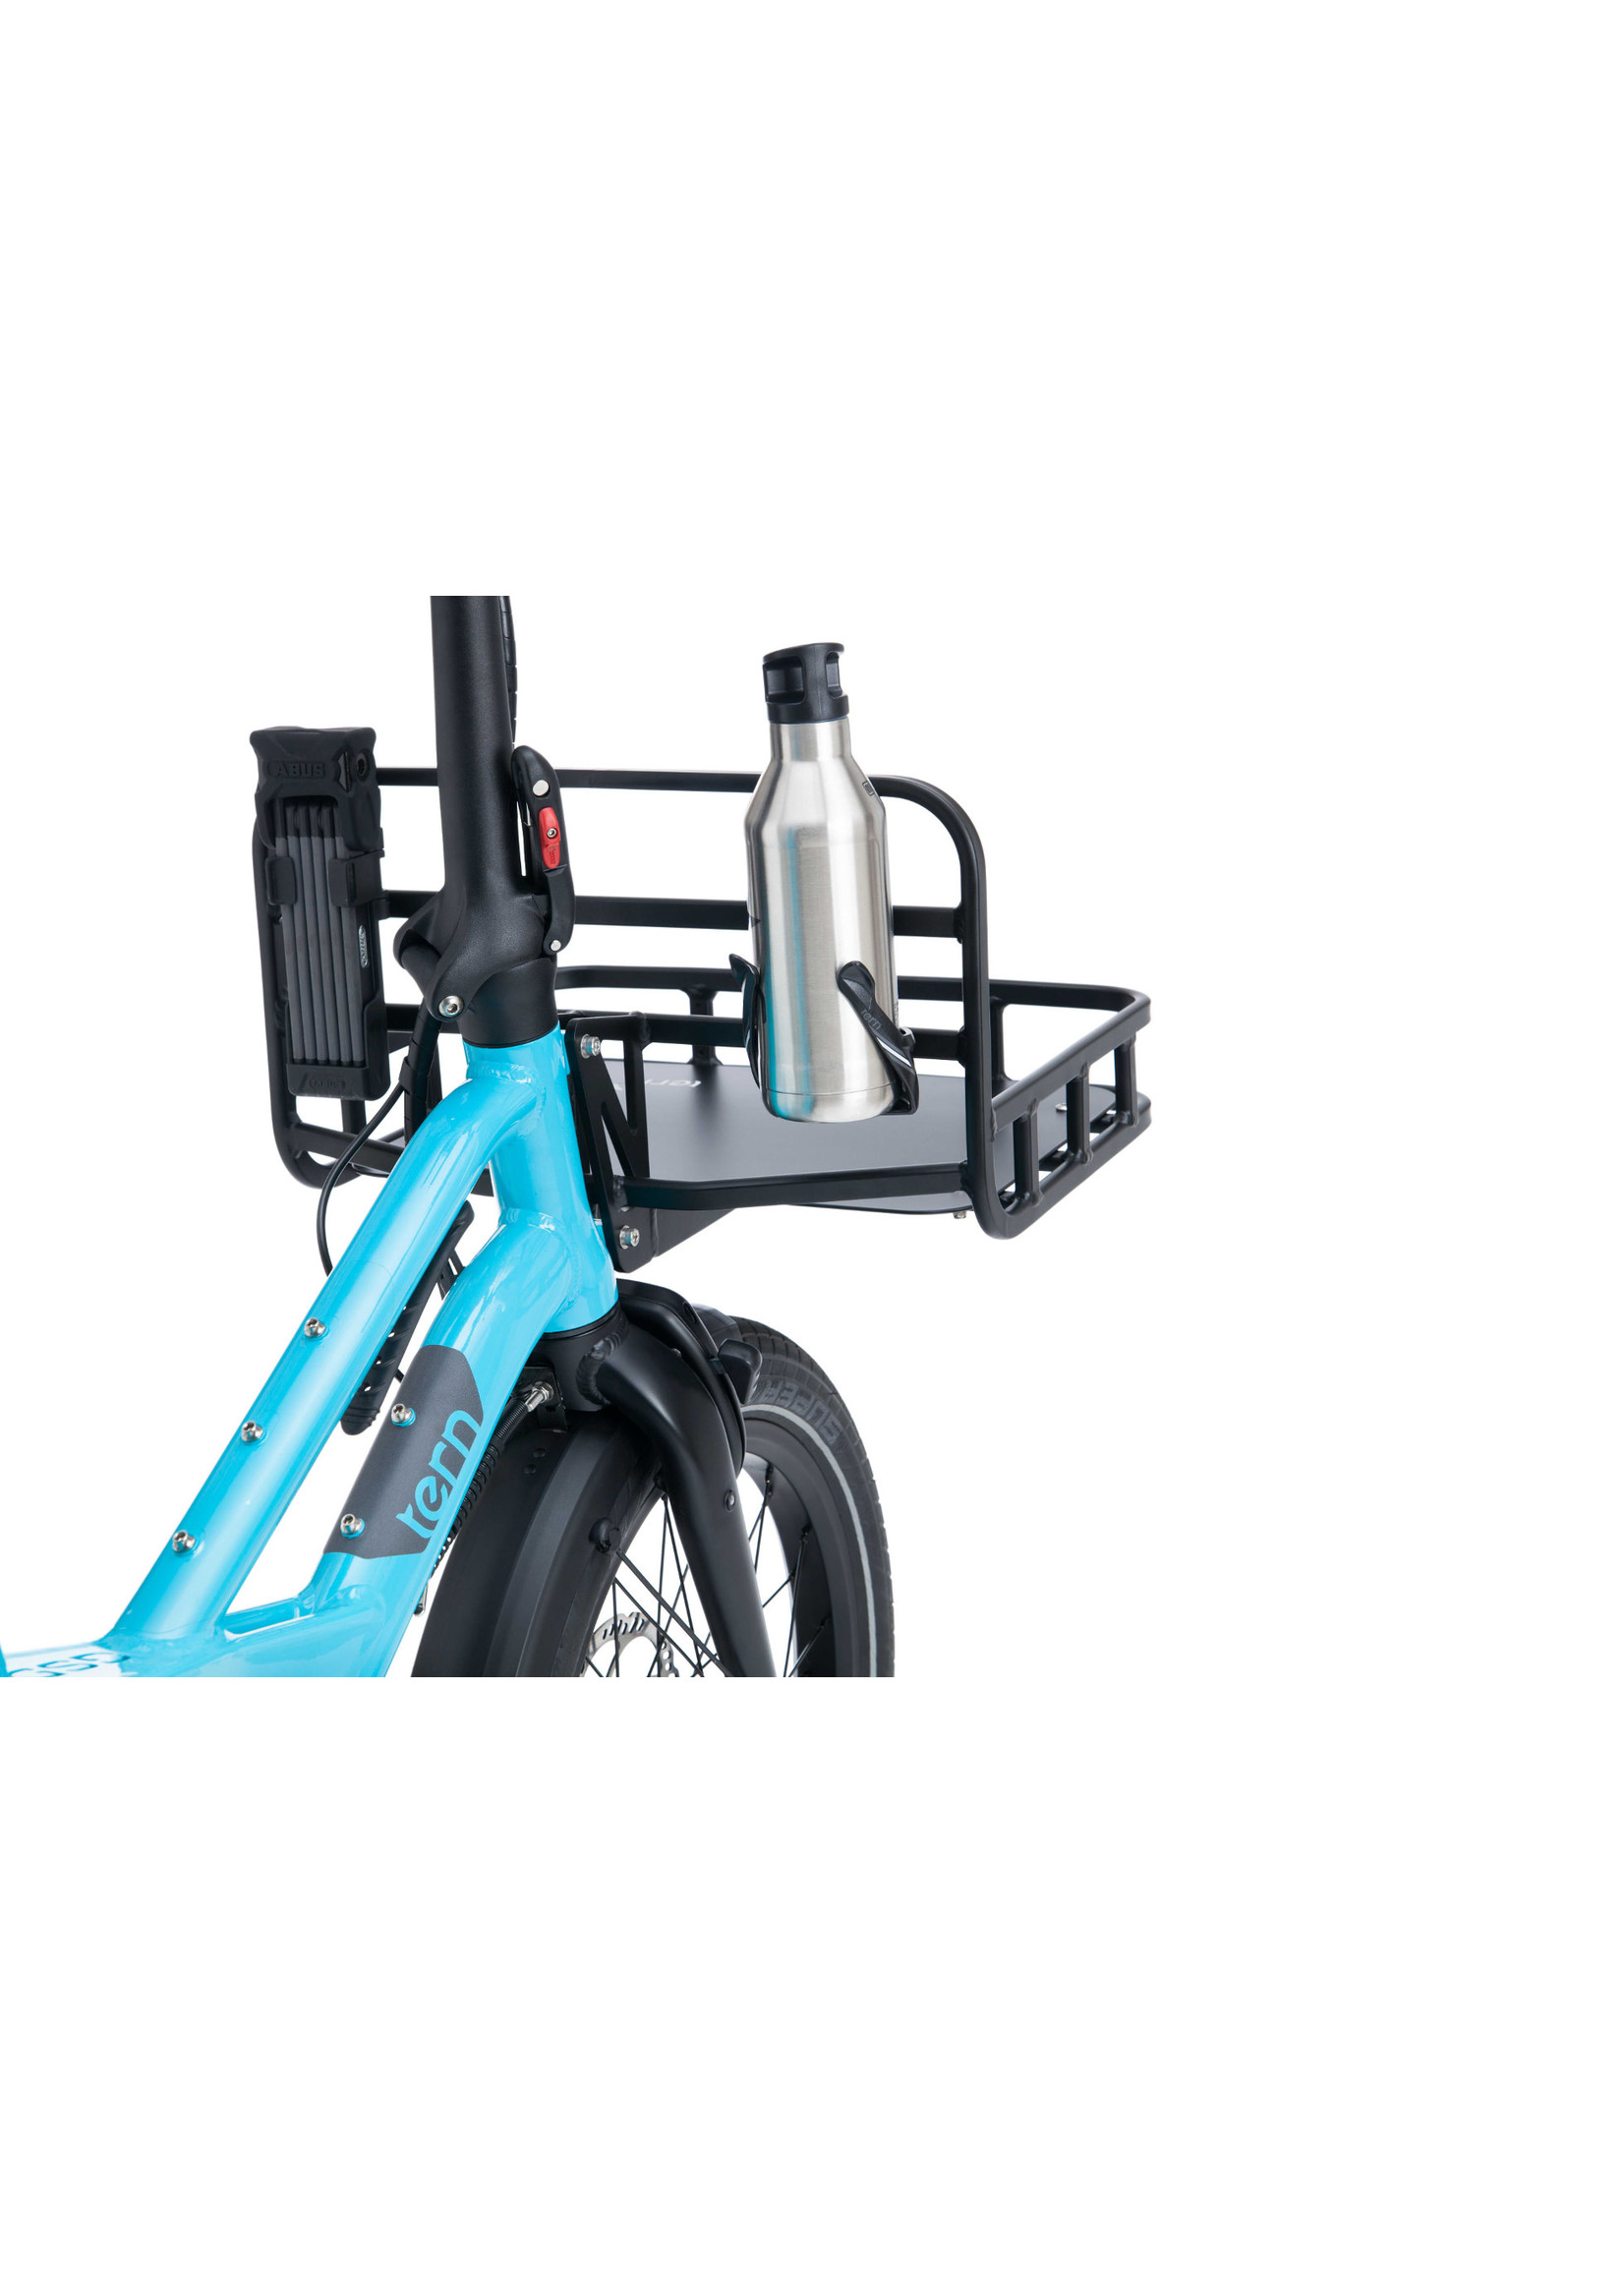 Tern eBikes Tern HSD & GSD Accessory Transporteur Front Cargo Rack carries up to 20kg